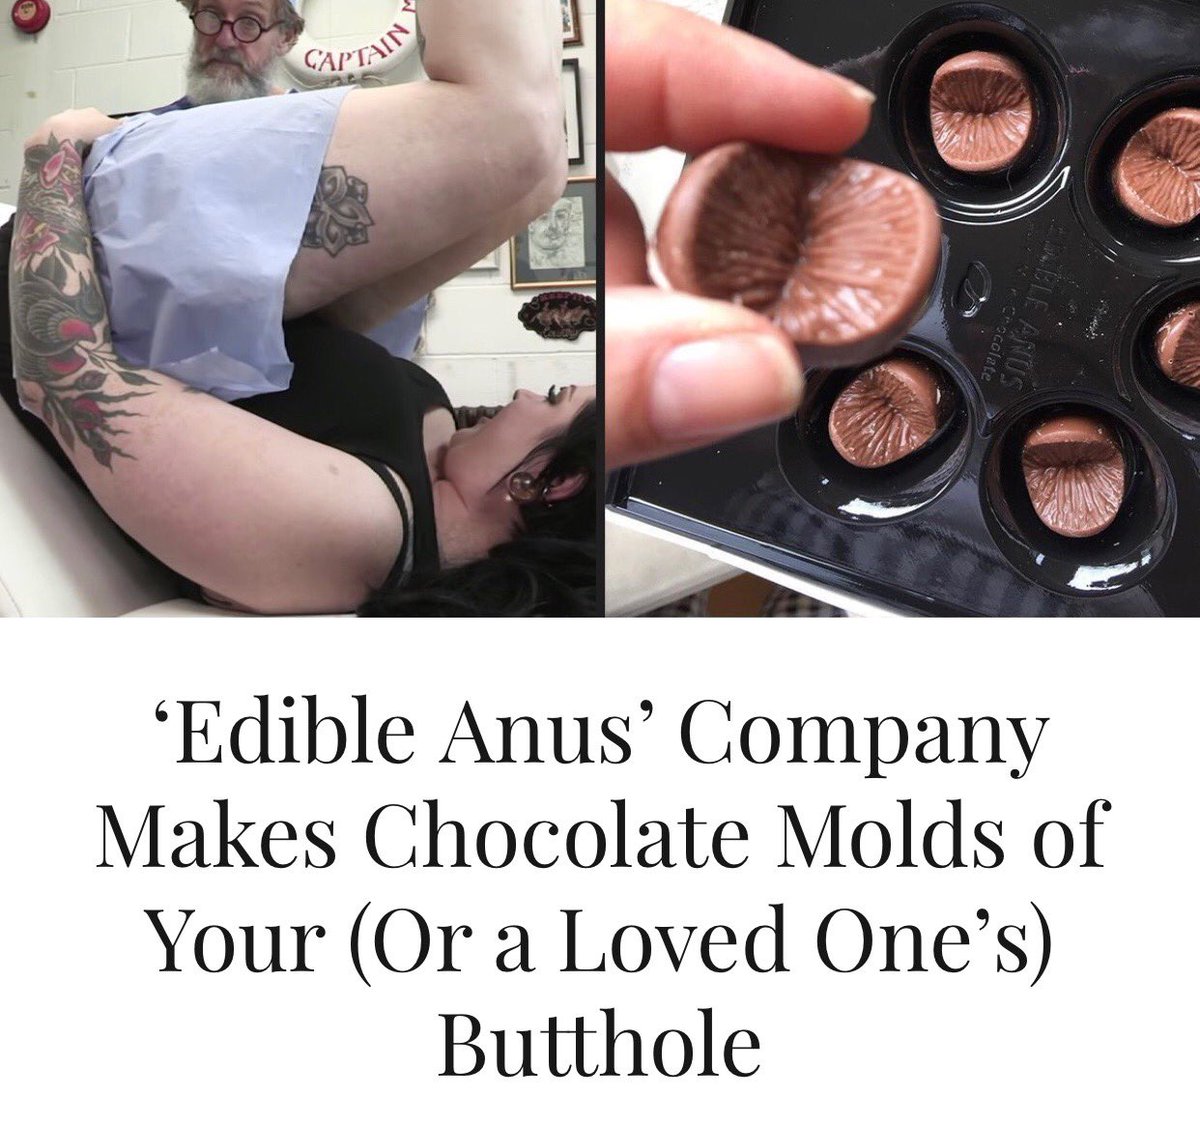 I ready thought I’d seen a lot of weird stuff but this takes the chocolate ...